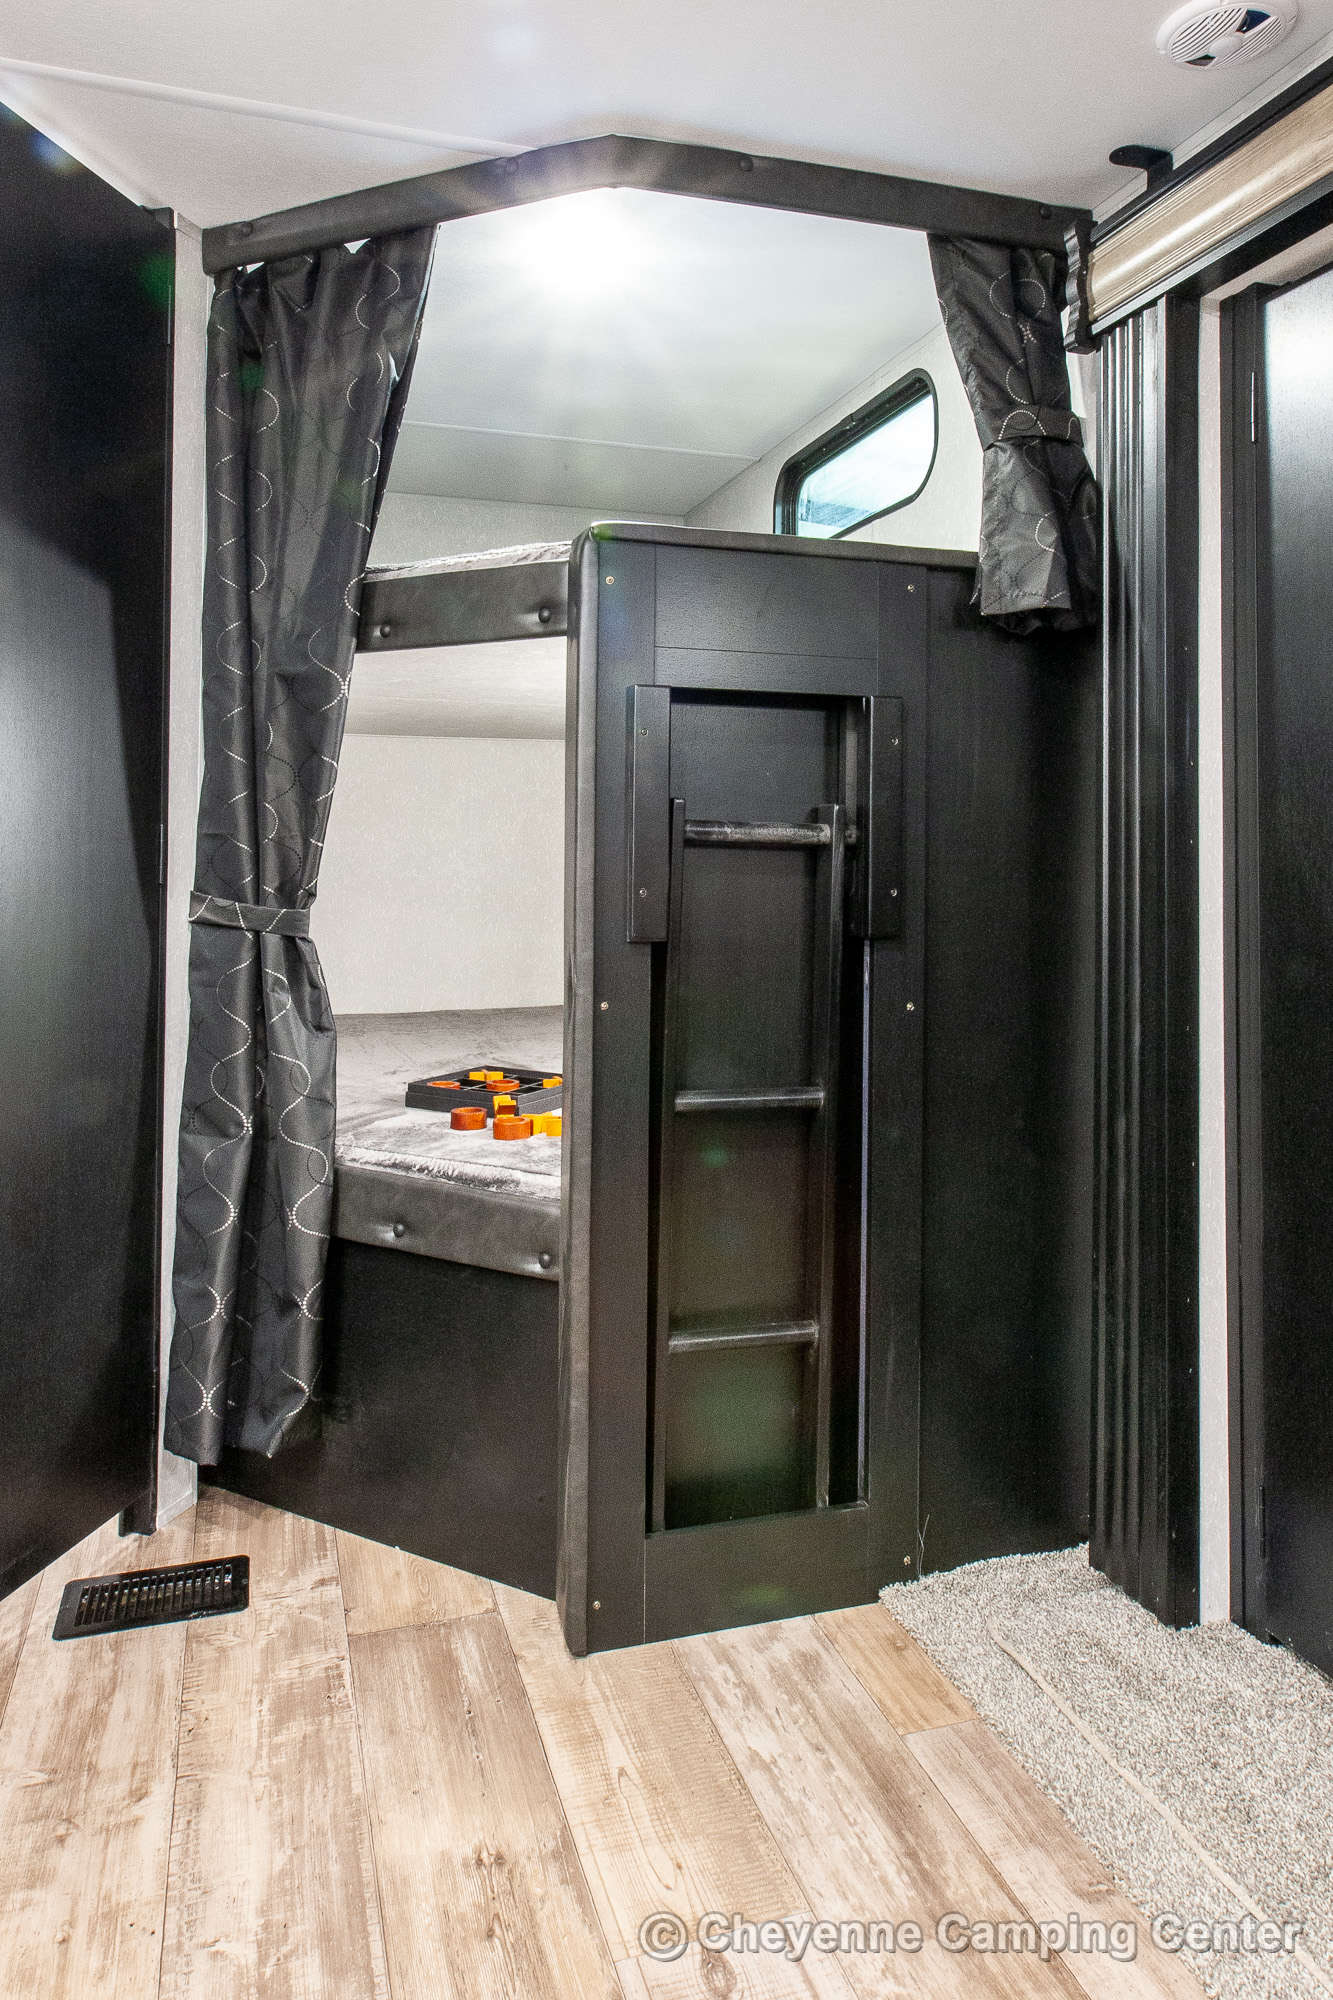 2022 Forest River Cherokee 274BRB Bunkhouse Travel Trailer Interior Image